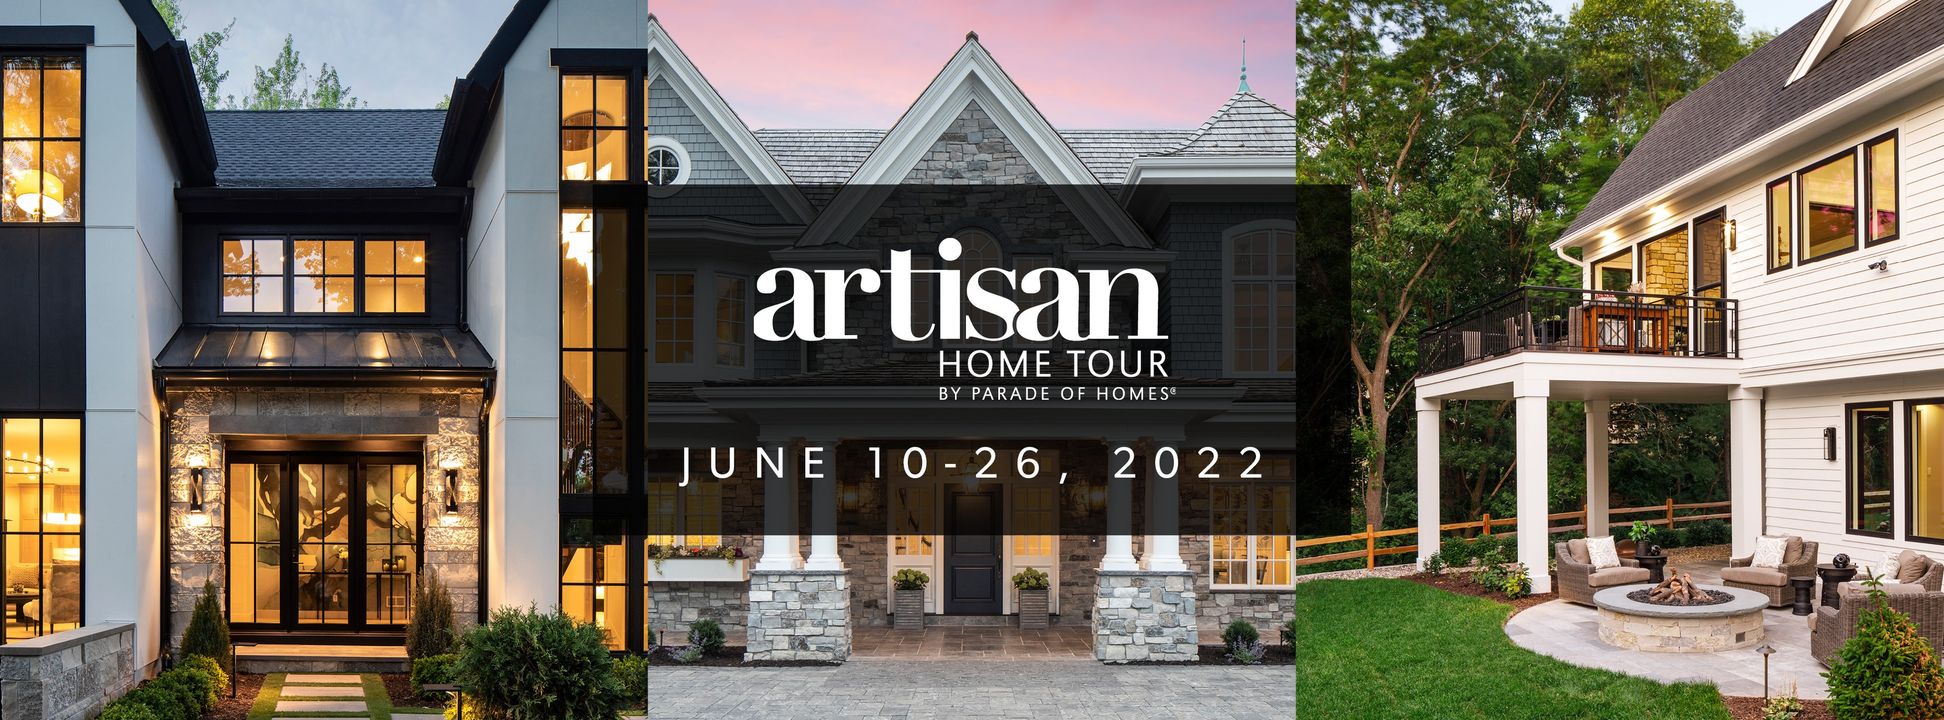 Image for Ninth Annual Artisan Home Tour by Parade of Homes Features 17 Incredible New Homes and 6 Remodeled Homes